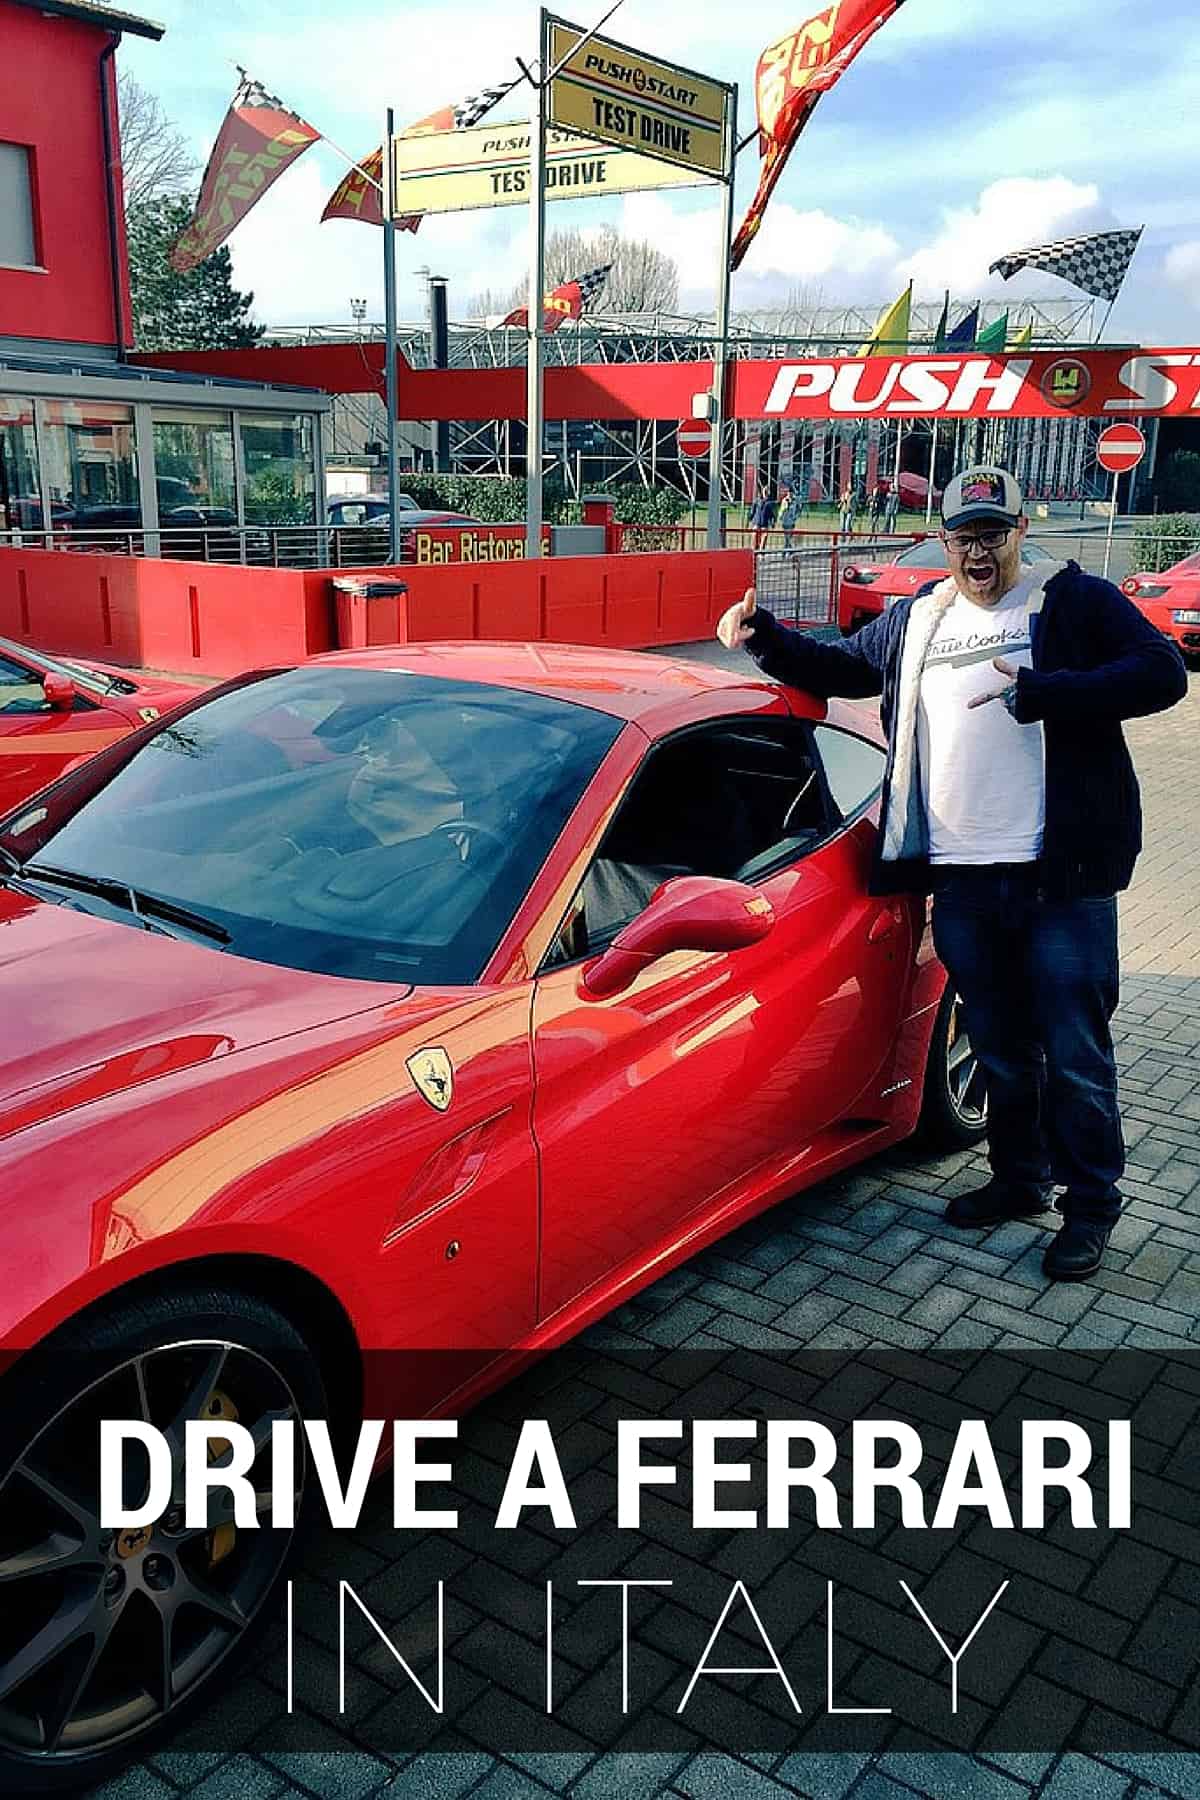 There's no experience more thrilling than the Ferrari Experience at 100km/h in 3.9 seconds. Check out where to drive a Ferrari in Italy.